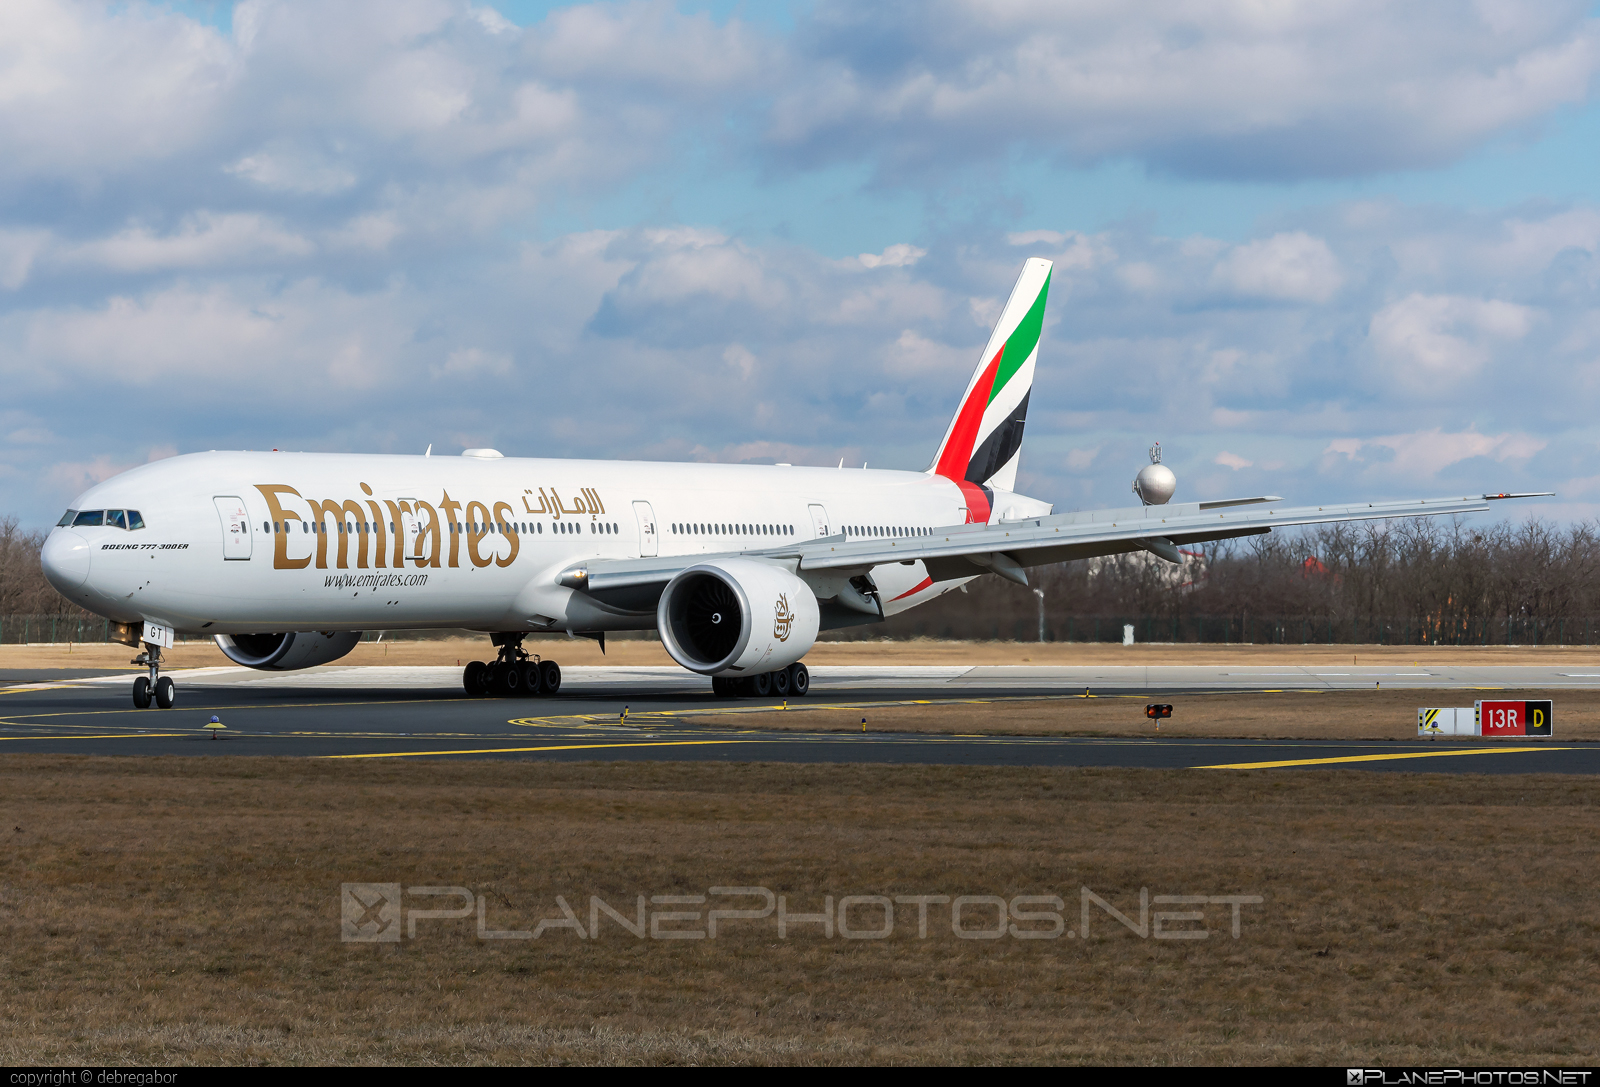 Boeing 777-300ER - A6-EGT operated by Emirates #b777 #b777er #boeing #boeing777 #emirates #tripleseven